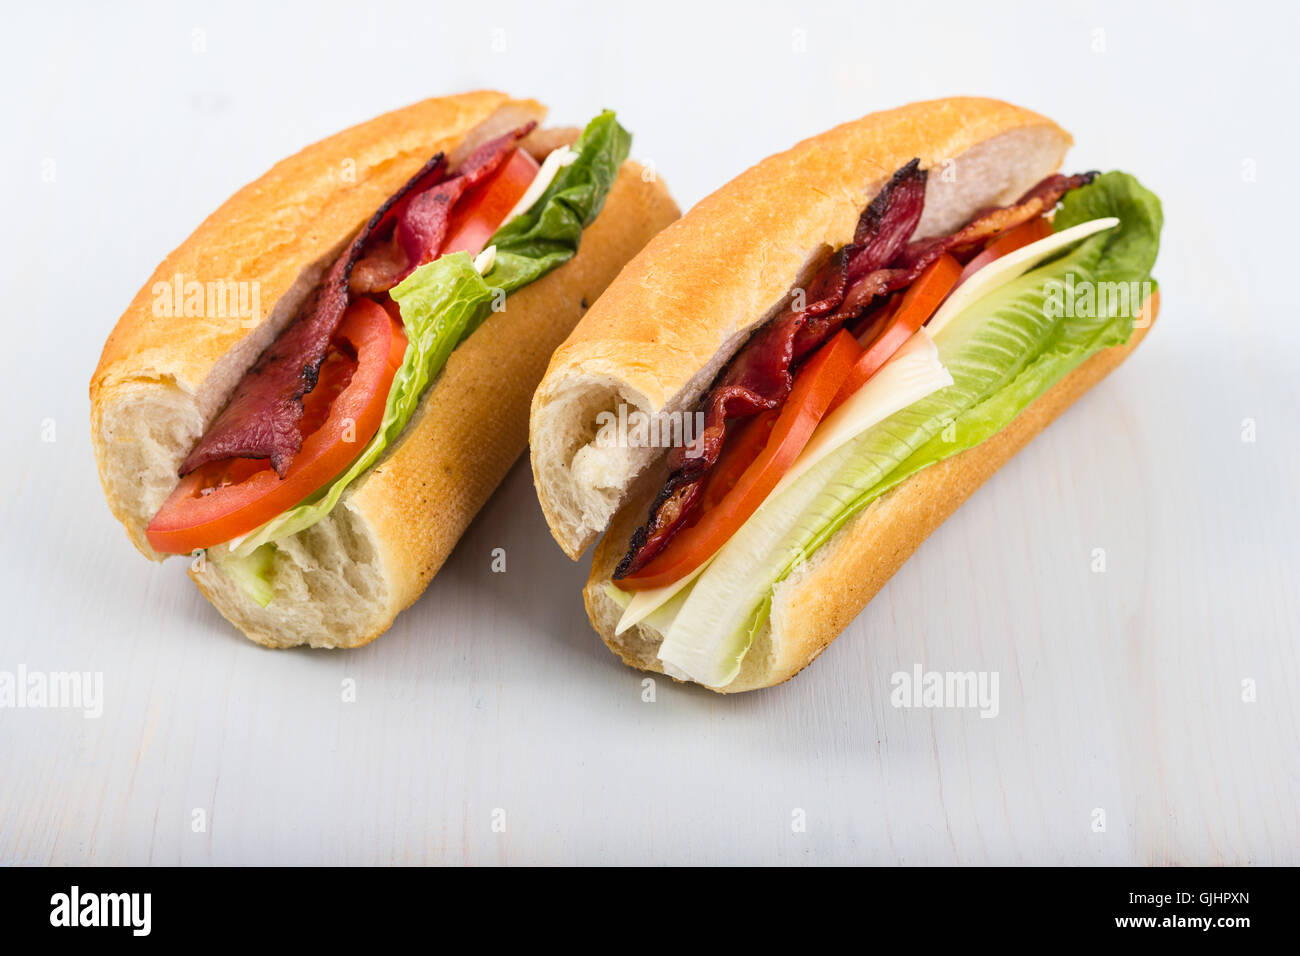 Fresh sandwich with tomatoes, bacon, and lettuce. Stock Photo